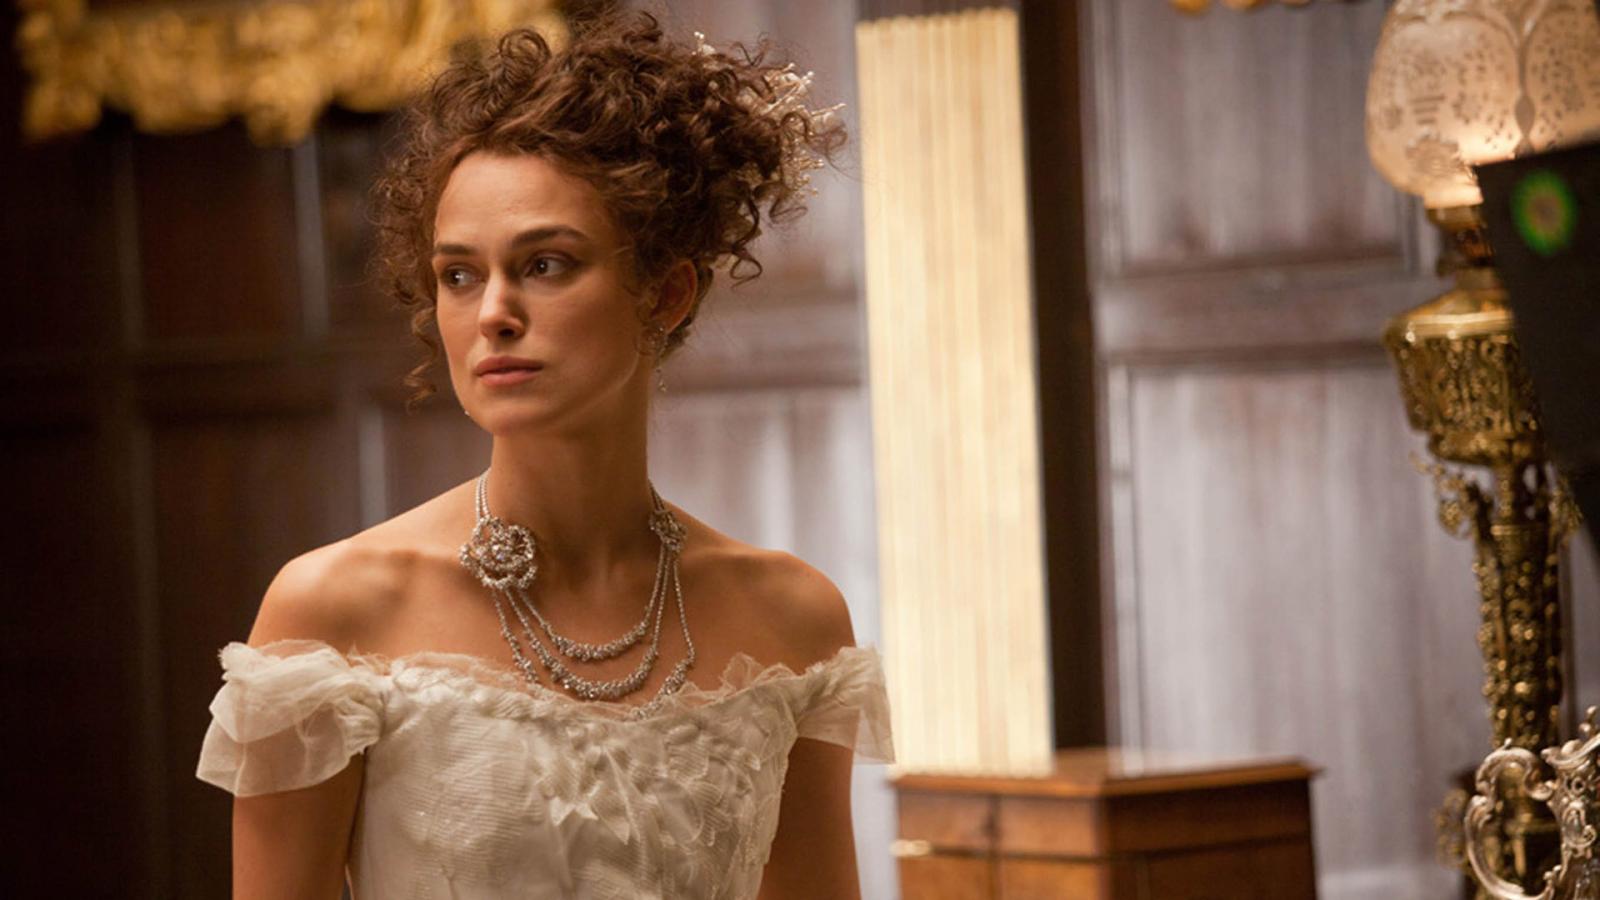 15 Historical Dramas that Capture the Pride and Prejudice Vibe - image 10